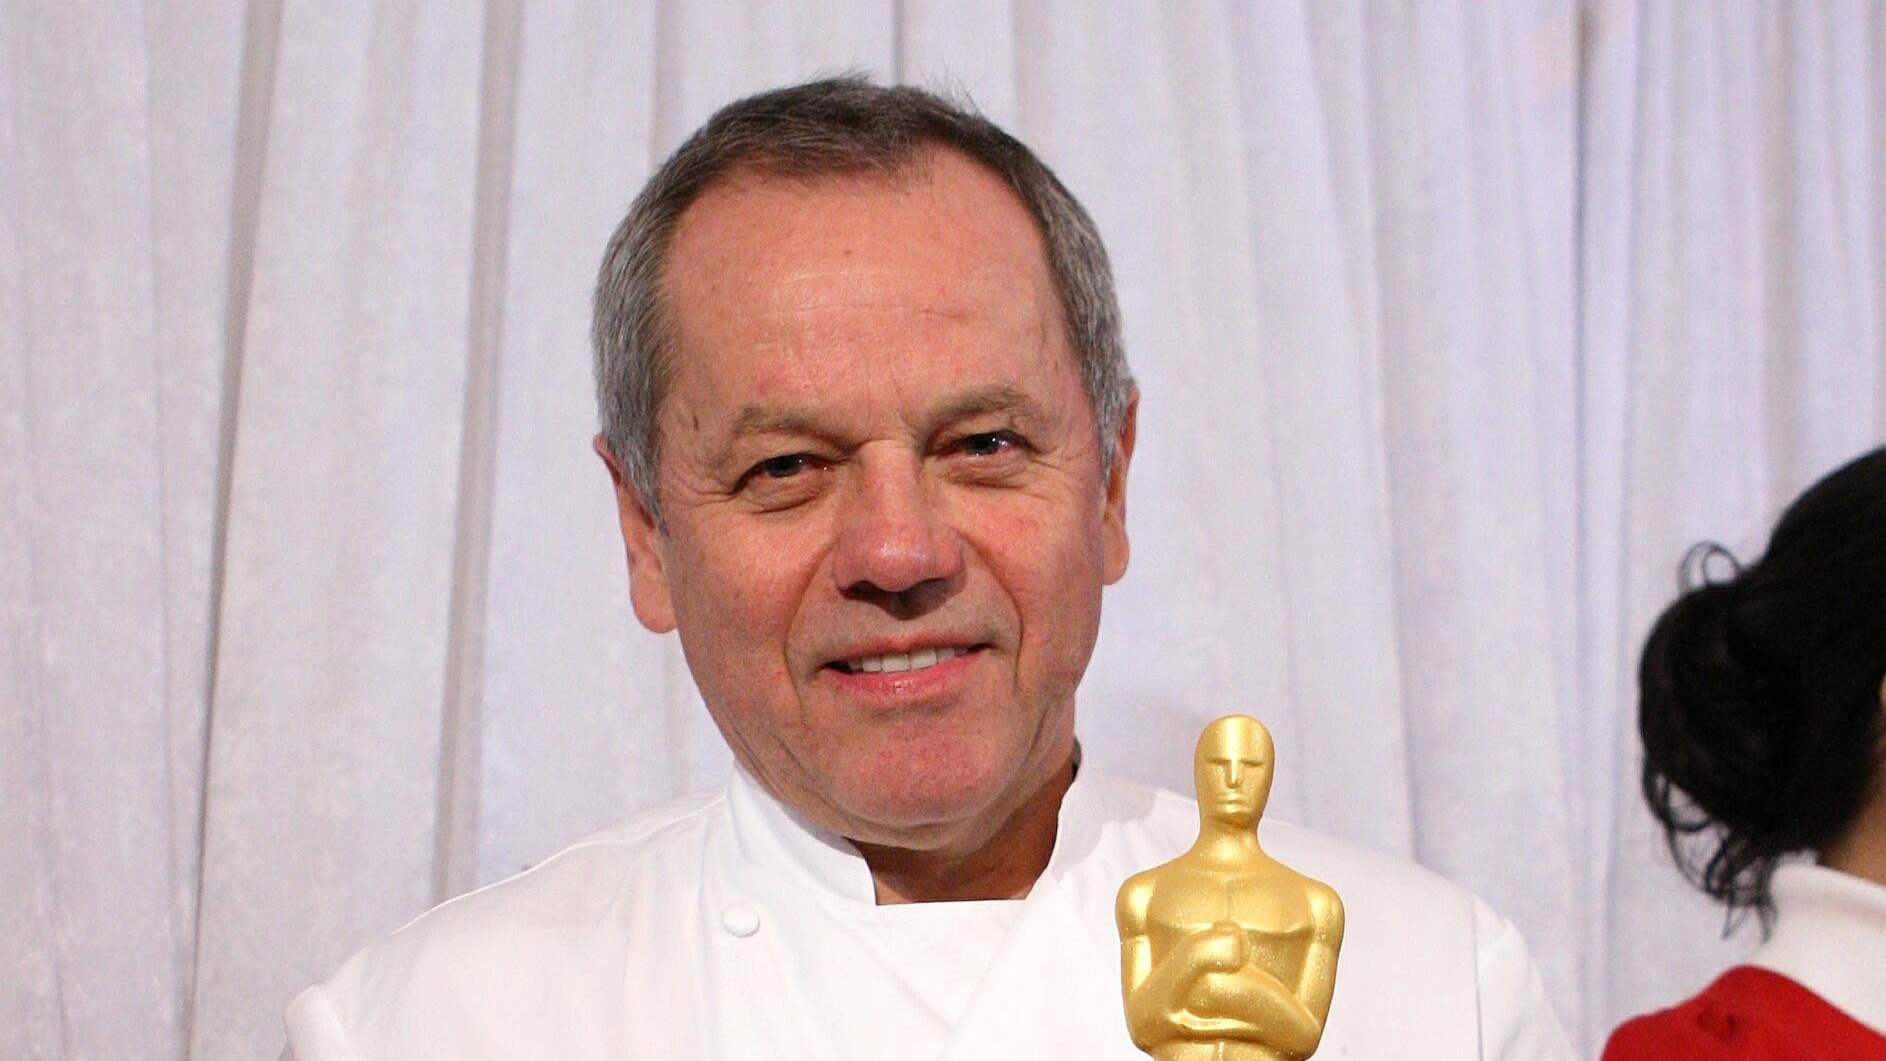 Oscars after-party chef Wolfgang Puck given star on Hollywood walk of fame